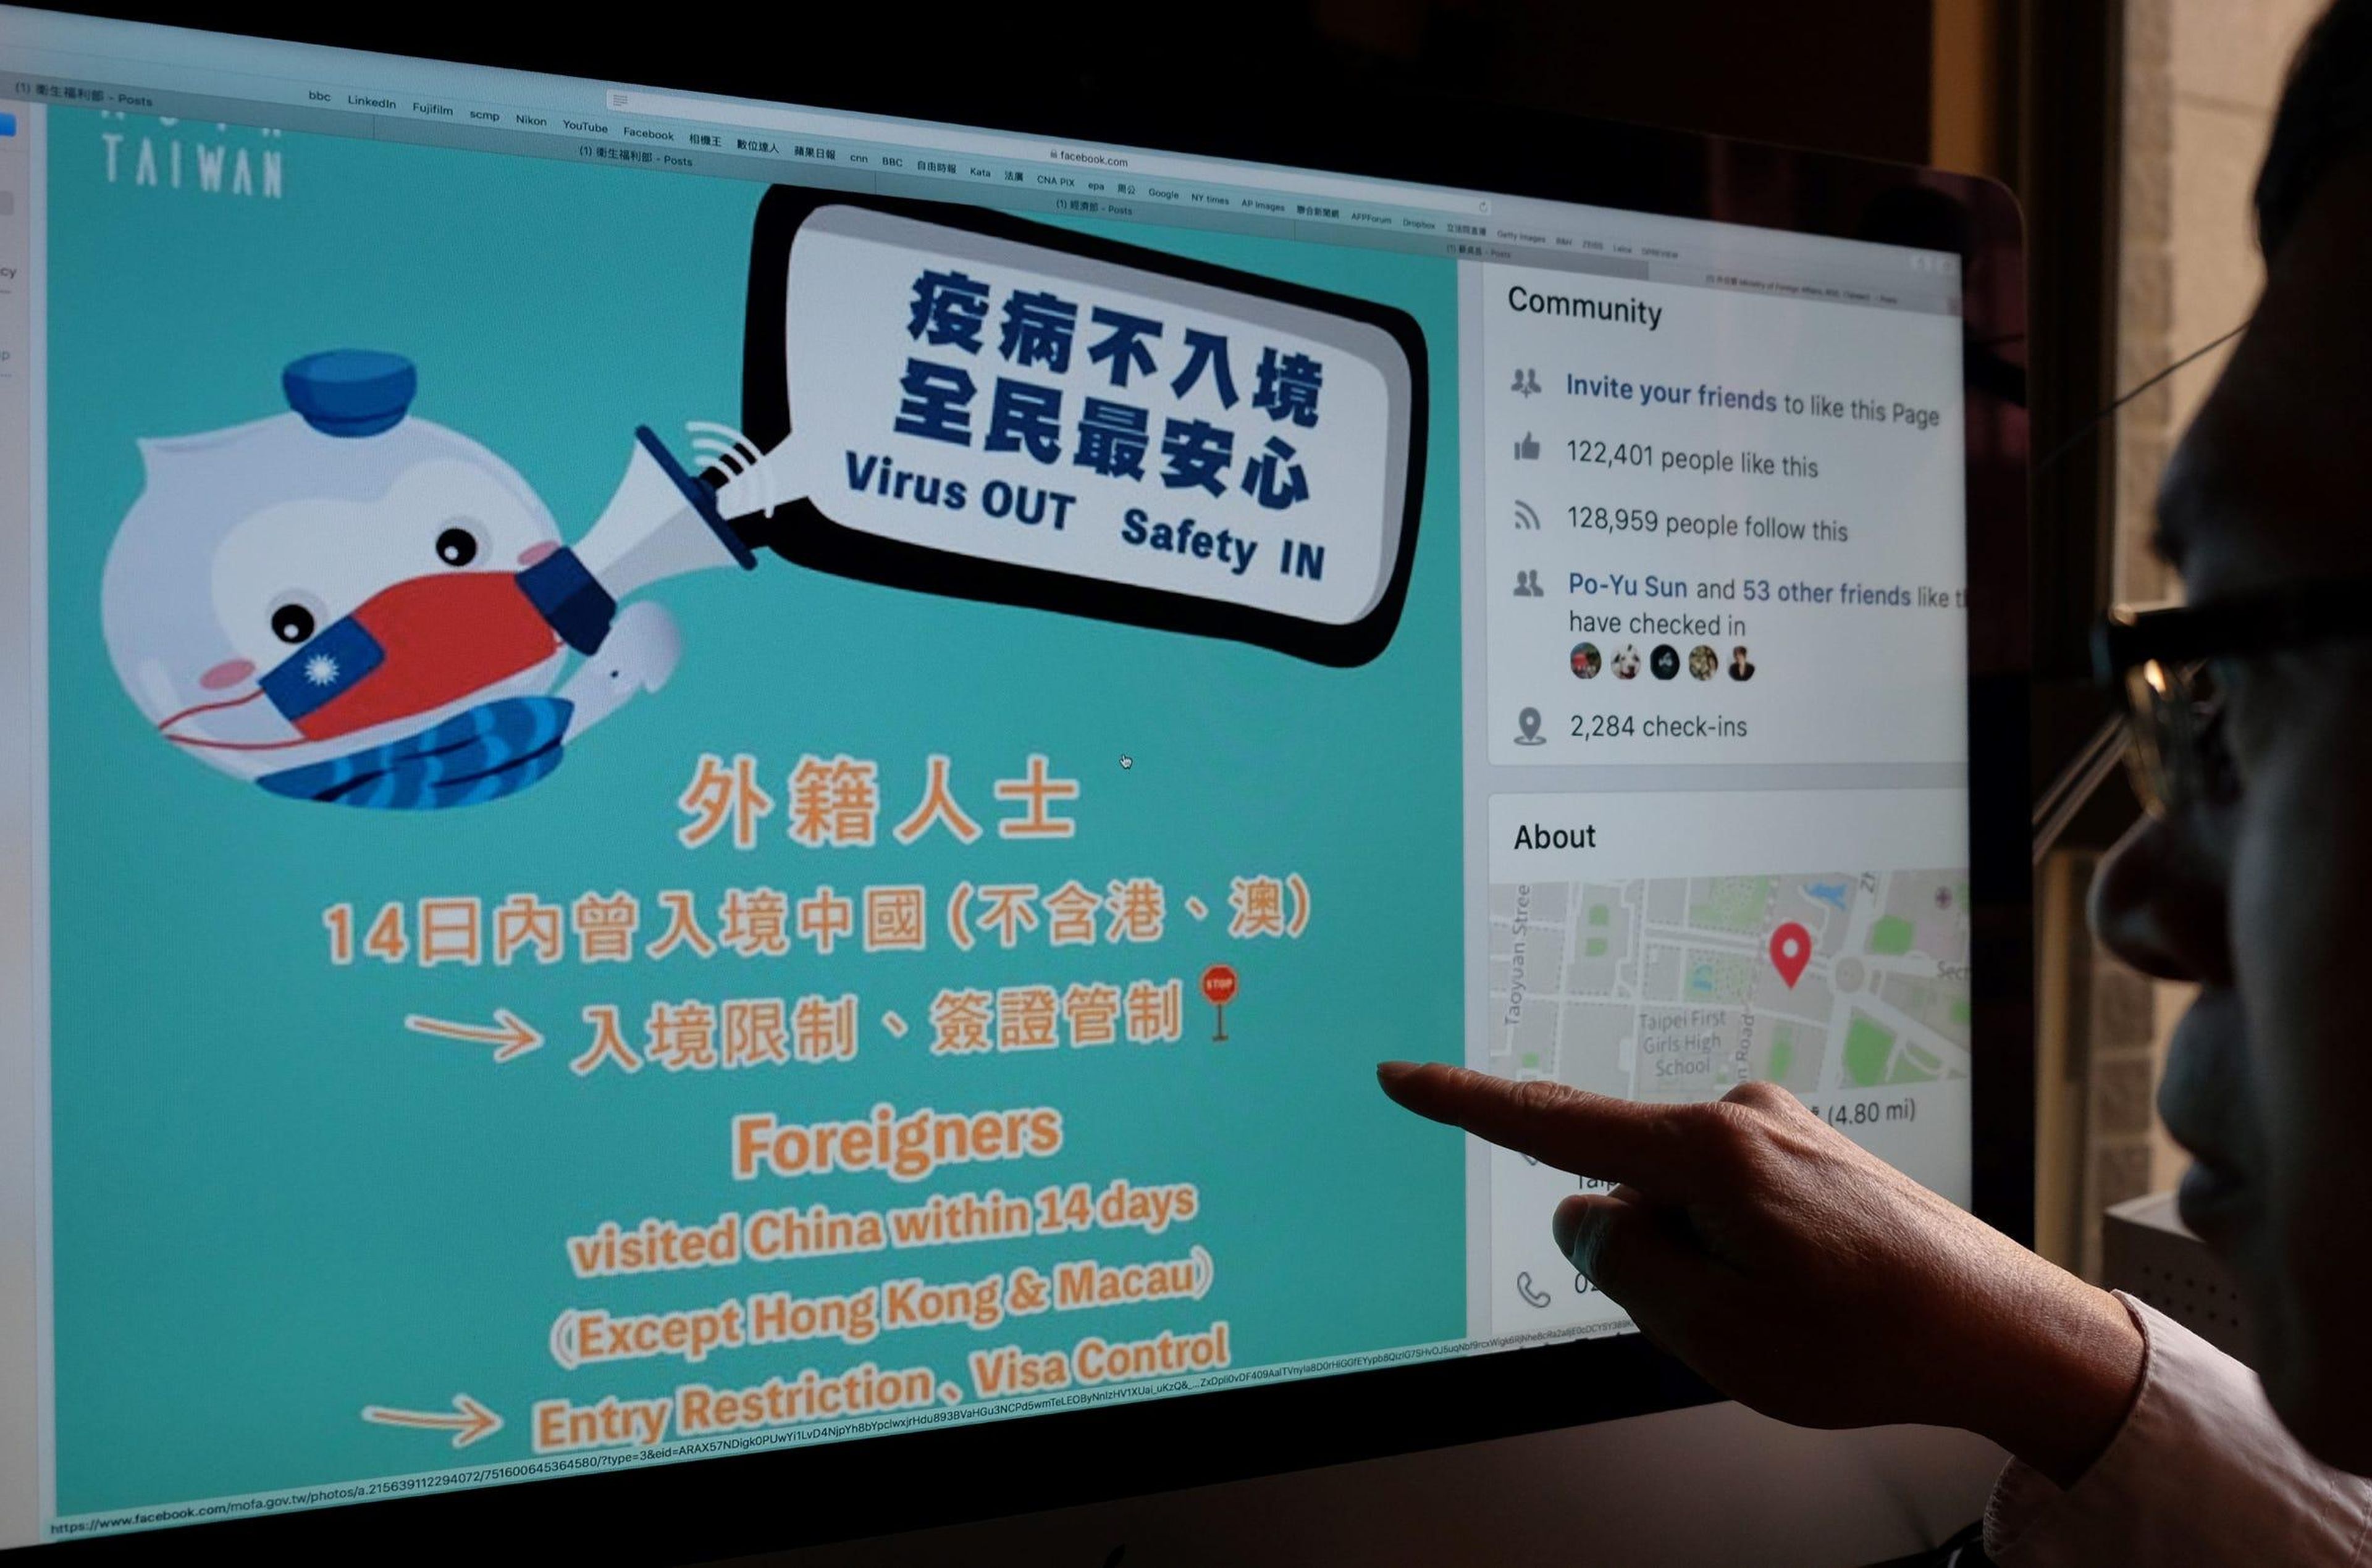 A man points to a webpage from Taiwan's Ministry of Foreign Affairs Facebook account on February 14, 2020.